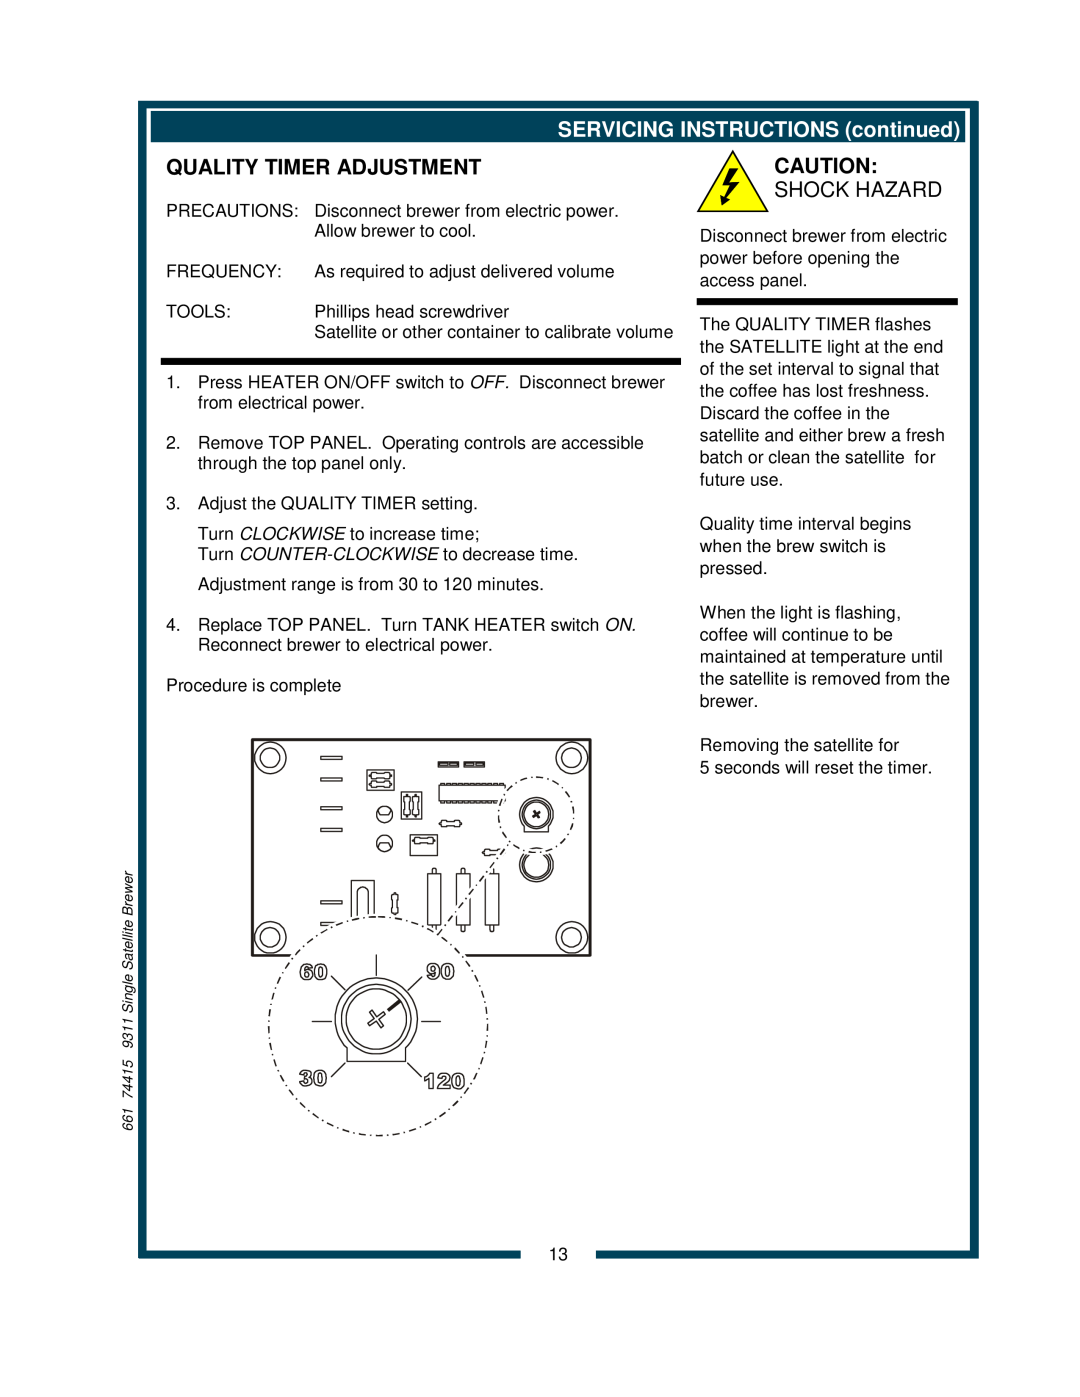 Bloomfield 9311 owner manual Quality Timer Adjustment, SERVICING INSTRUCTIONS continued 